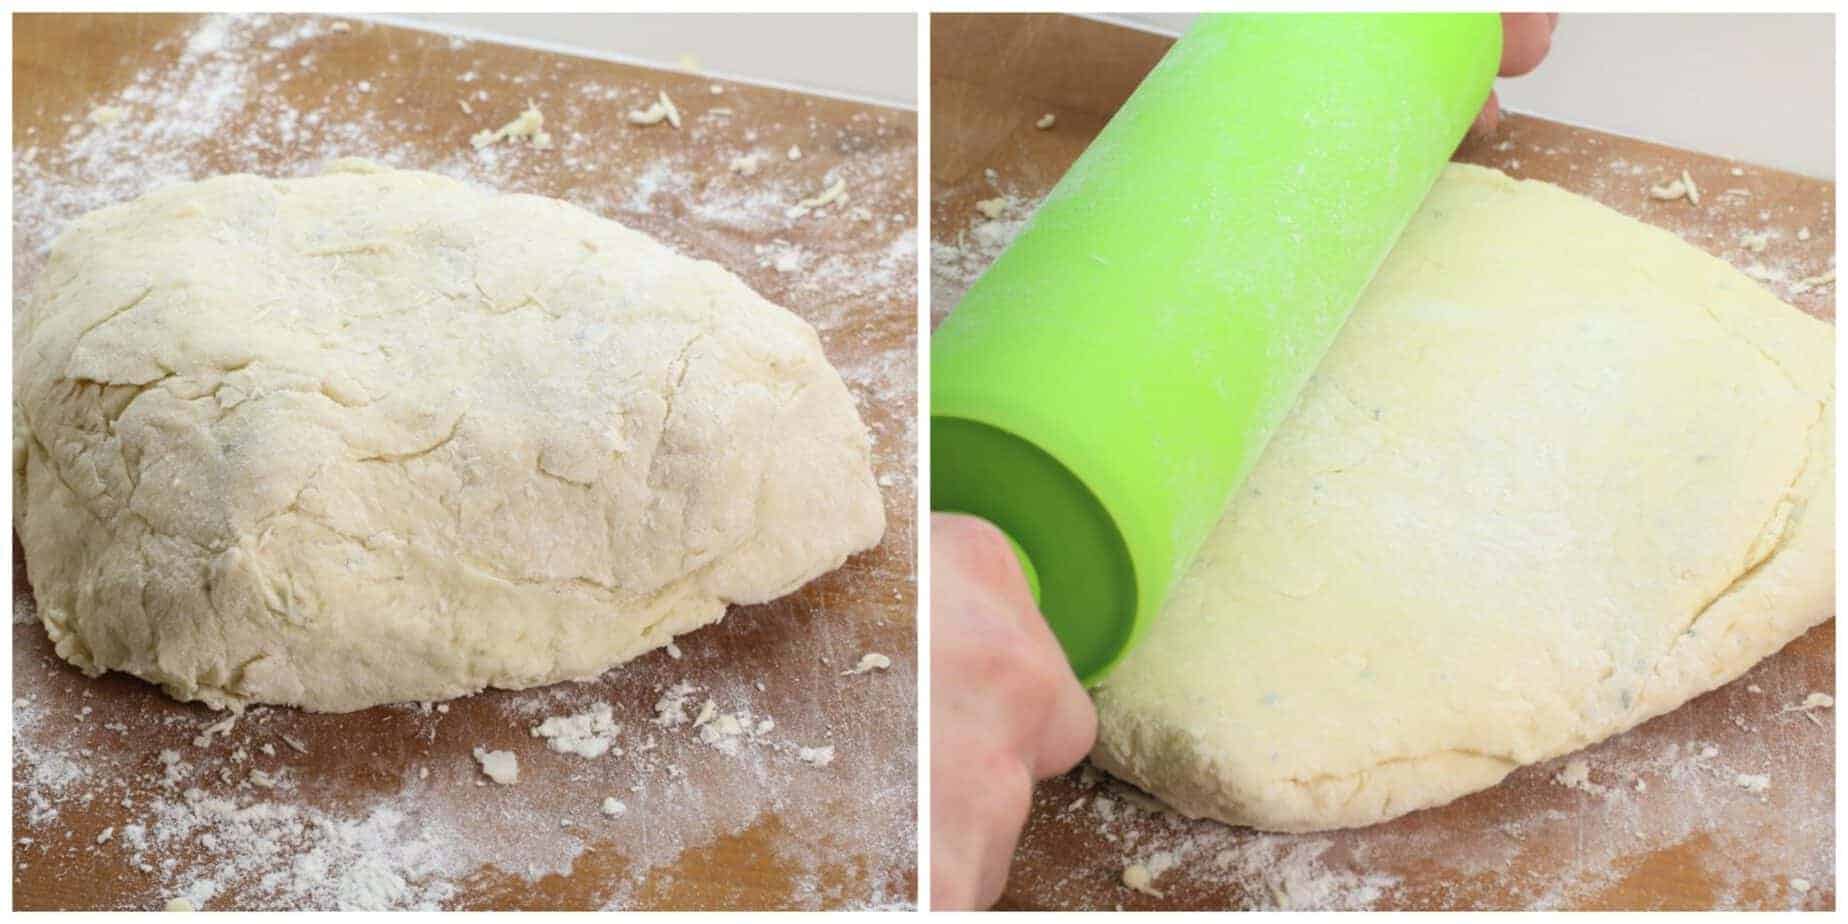 Rosemary & Garlic Biscuit dough being rolled out on a flour sprinkled wooden board